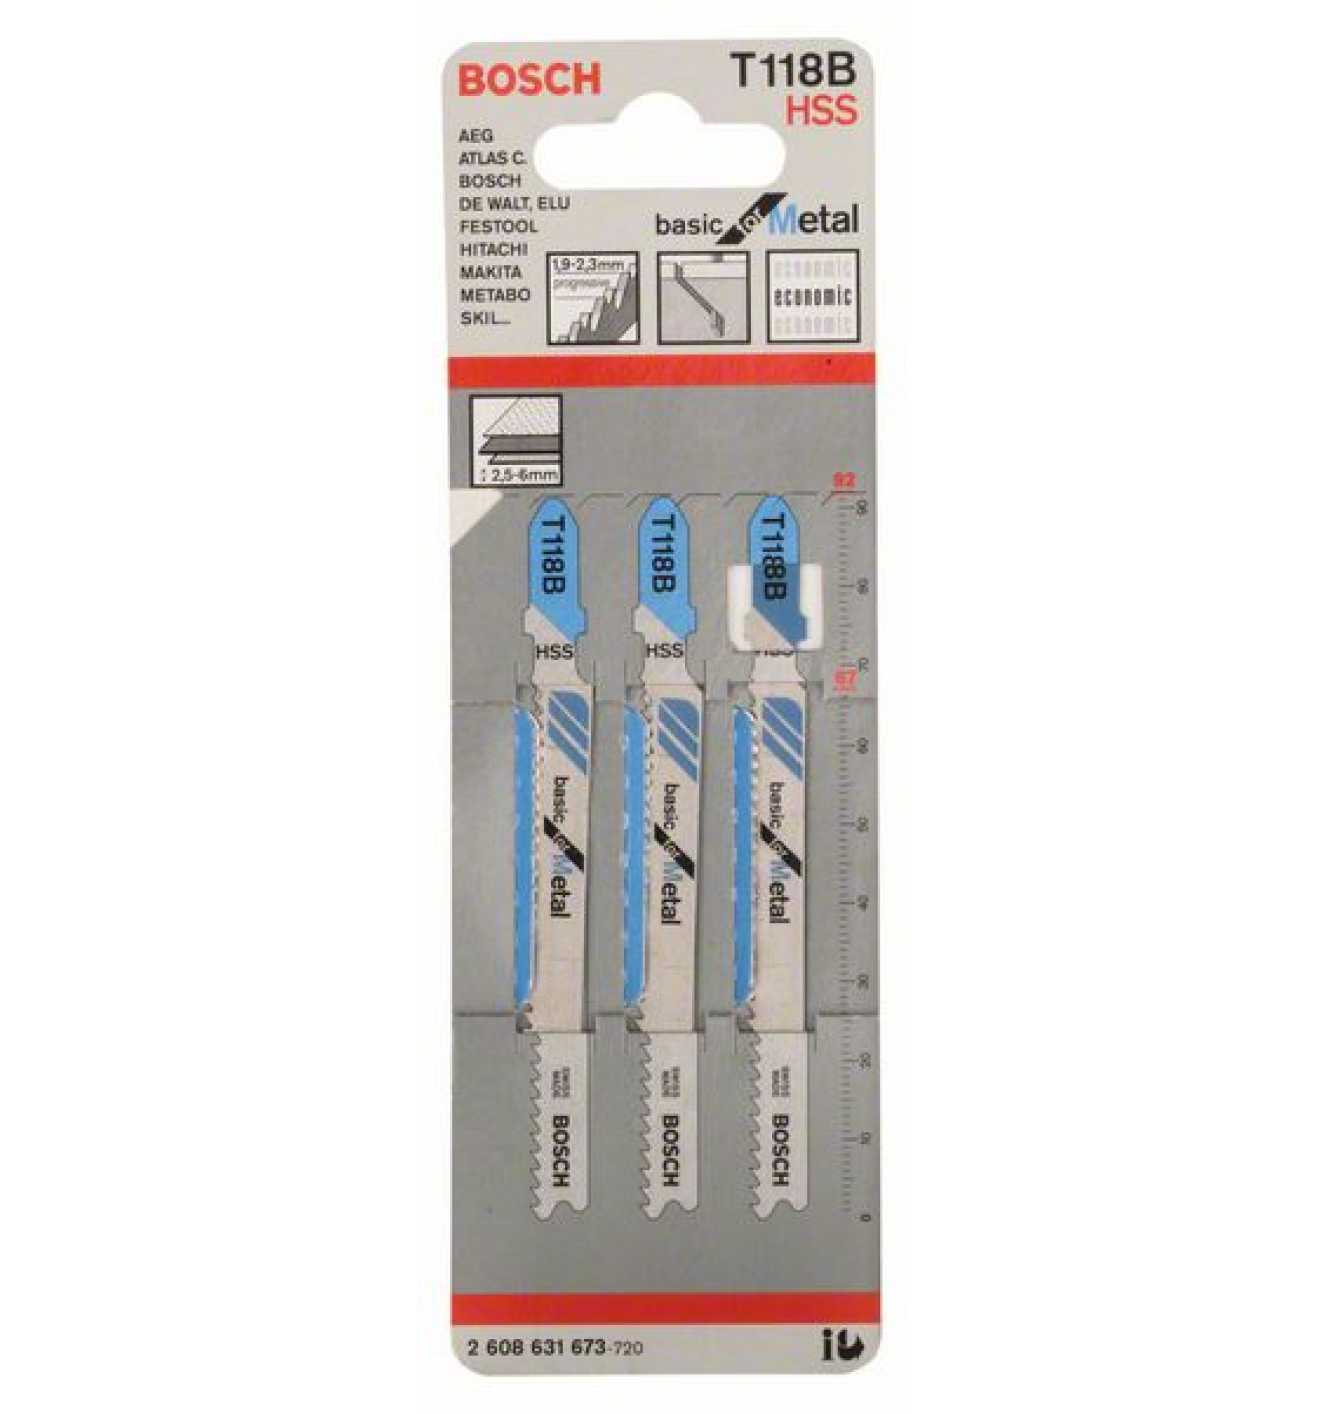 Bosch Jigsaw Blades T 118 B Basic for Metal 3 Pack 2608631673 Power Tool Services